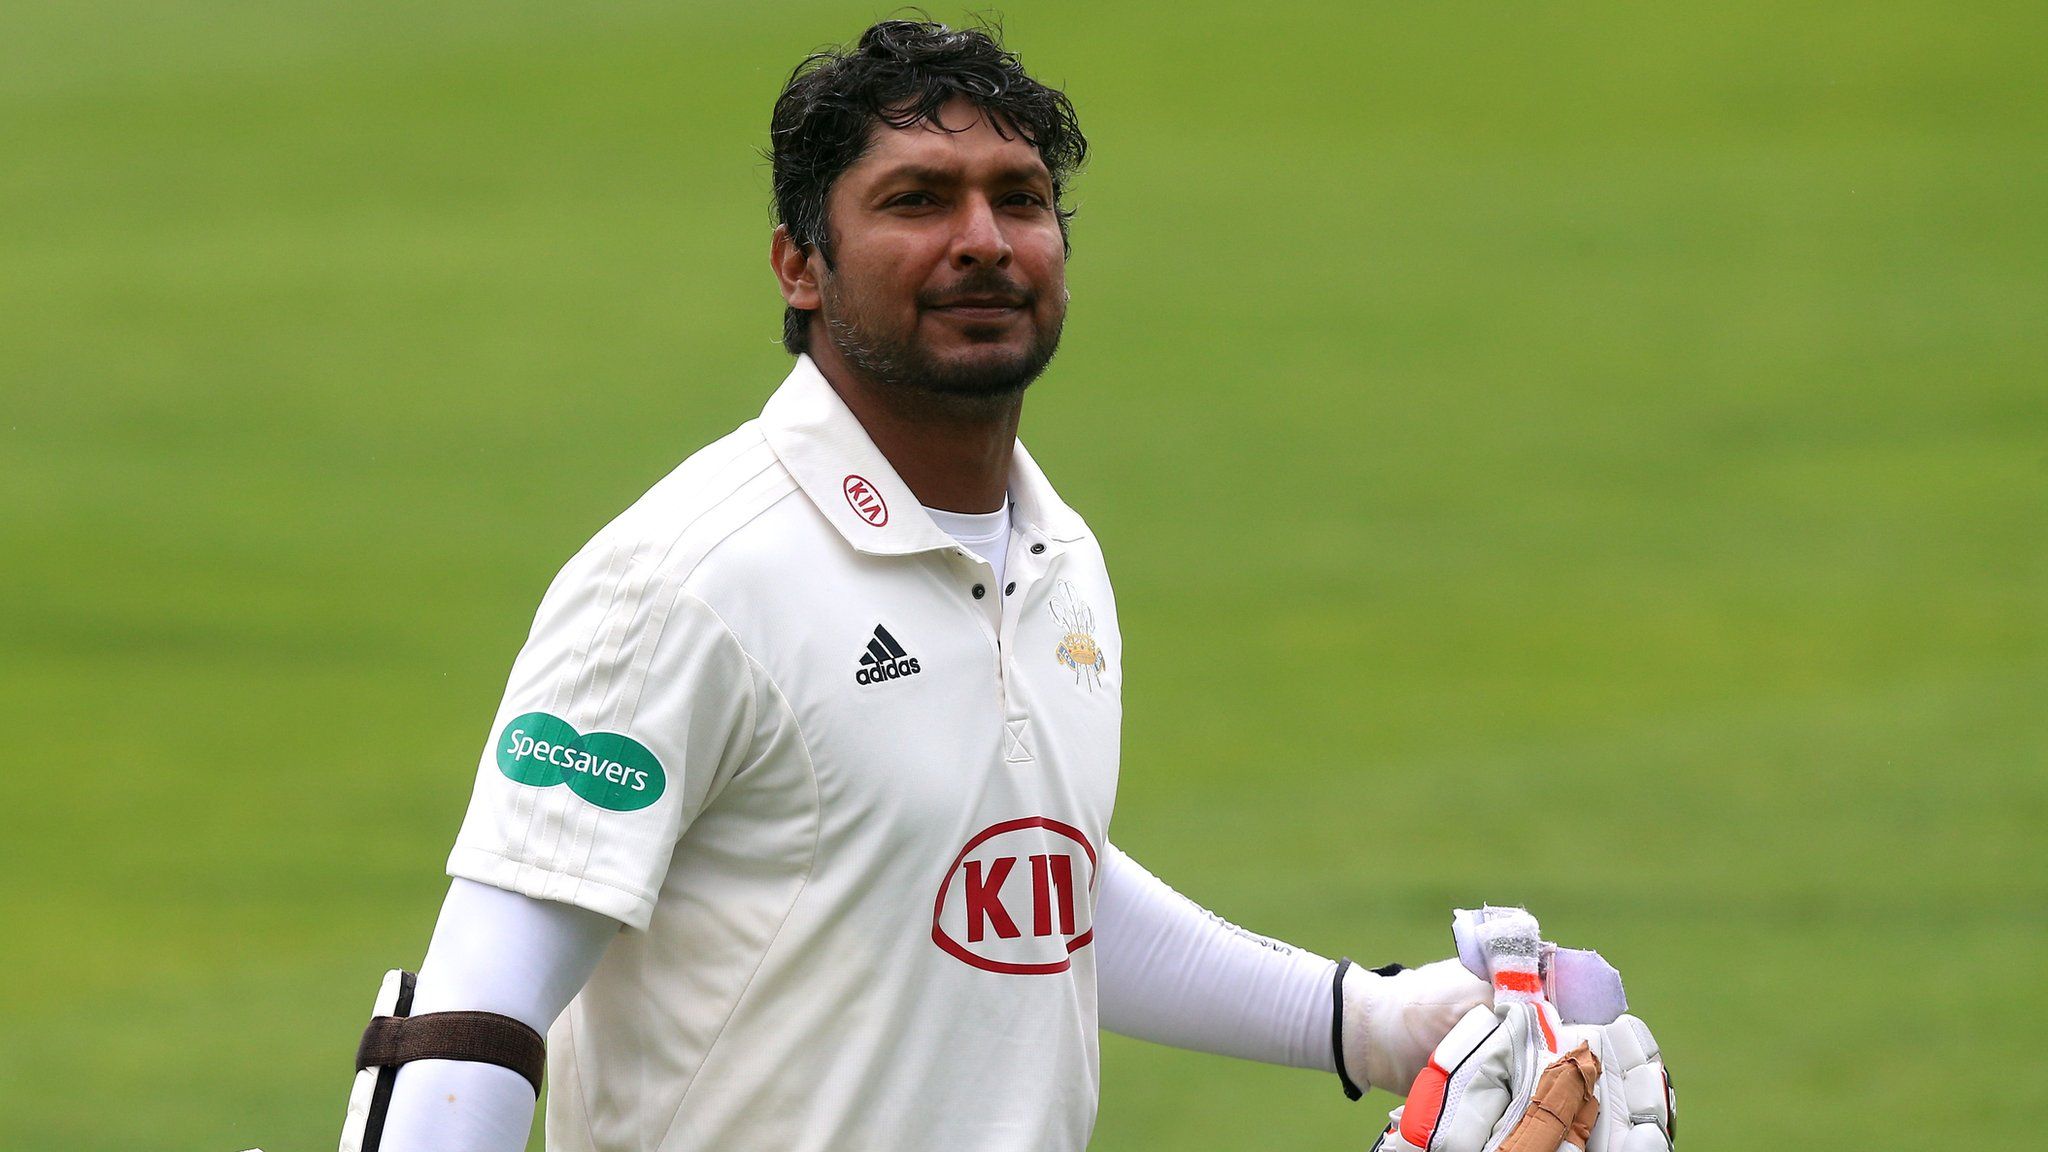 Kumar Sangakkara's sixth ton of 2017 makes this his best haul in an English summer, beating the five hundreds he scored for Surrey in 2015